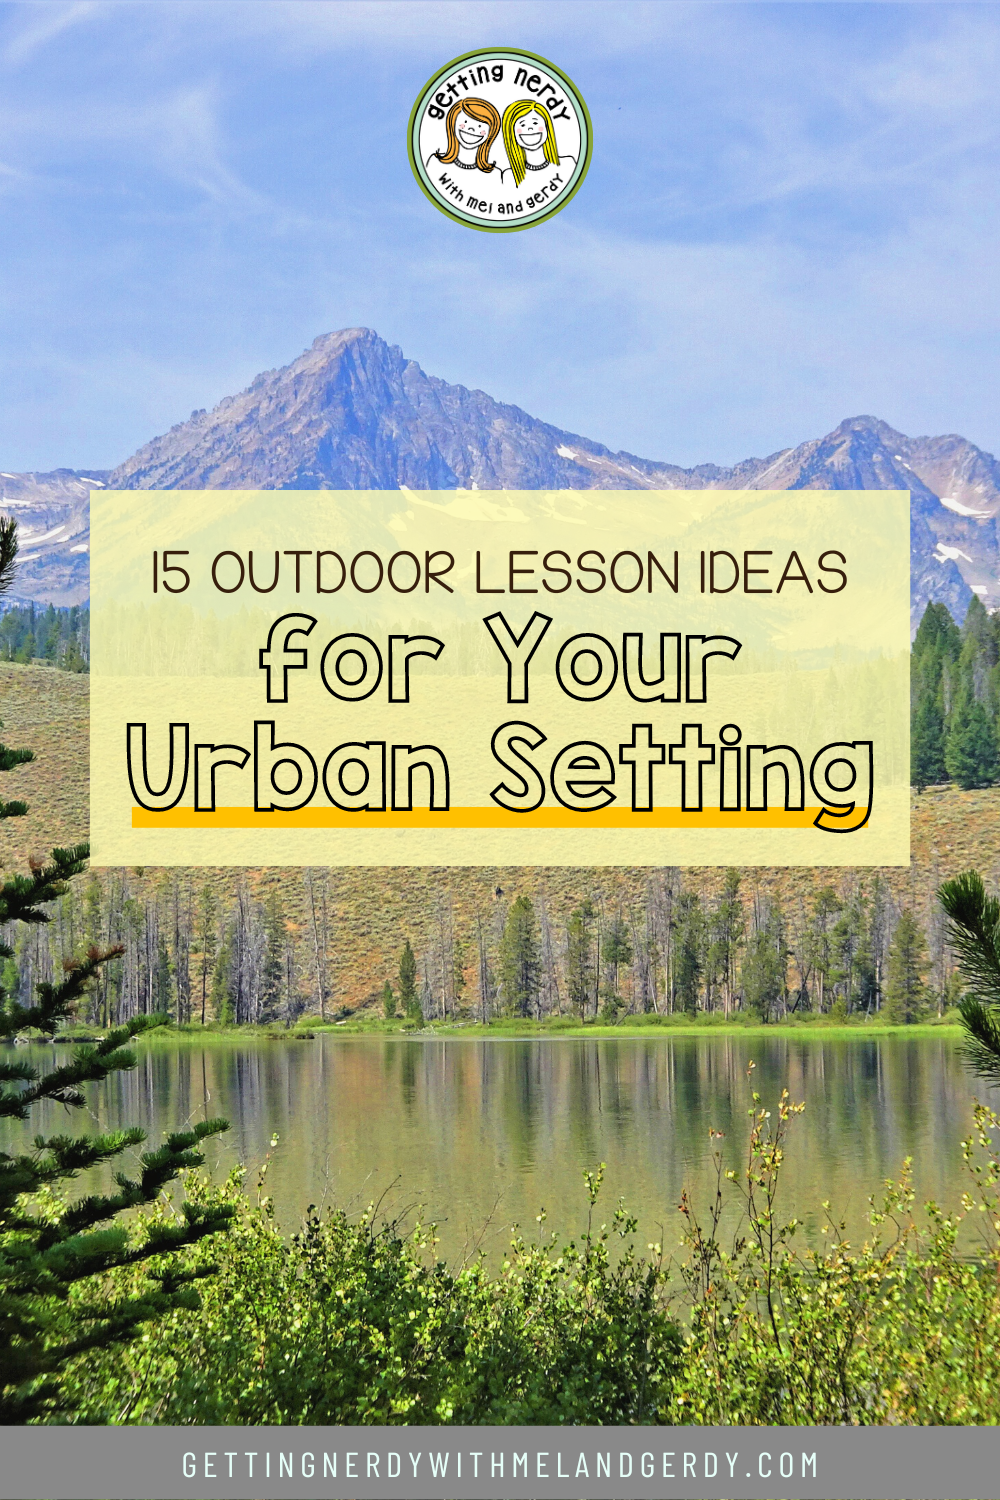 15 Outdoor Lesson Ideas for Your Urban Science Classroom